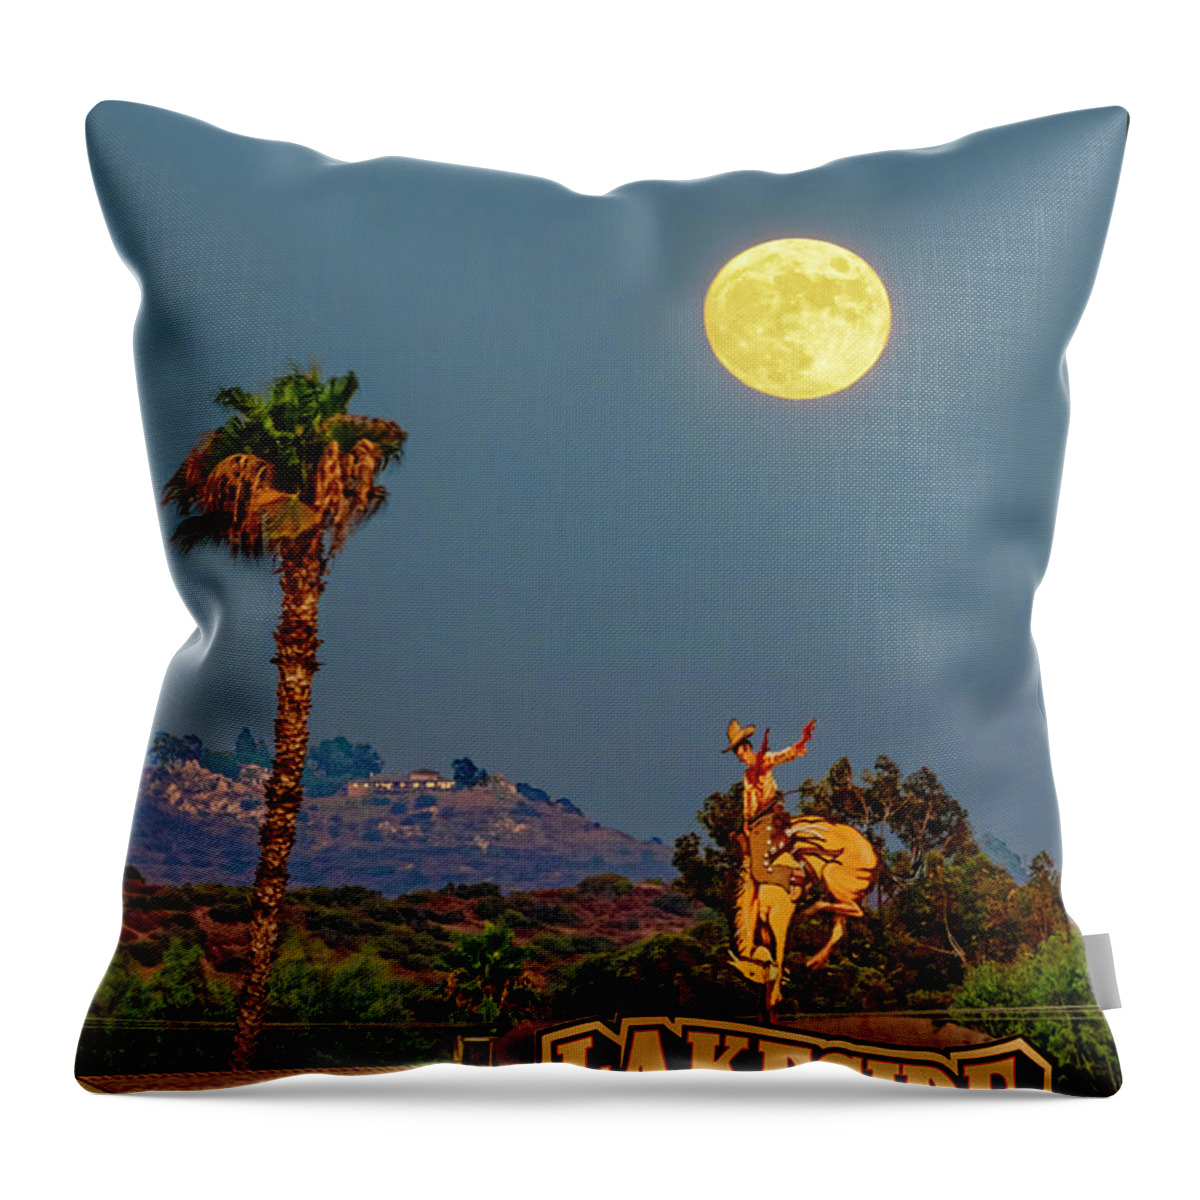 Lakeside Throw Pillow featuring the photograph Lakeside Moonrise by Dan McGeorge